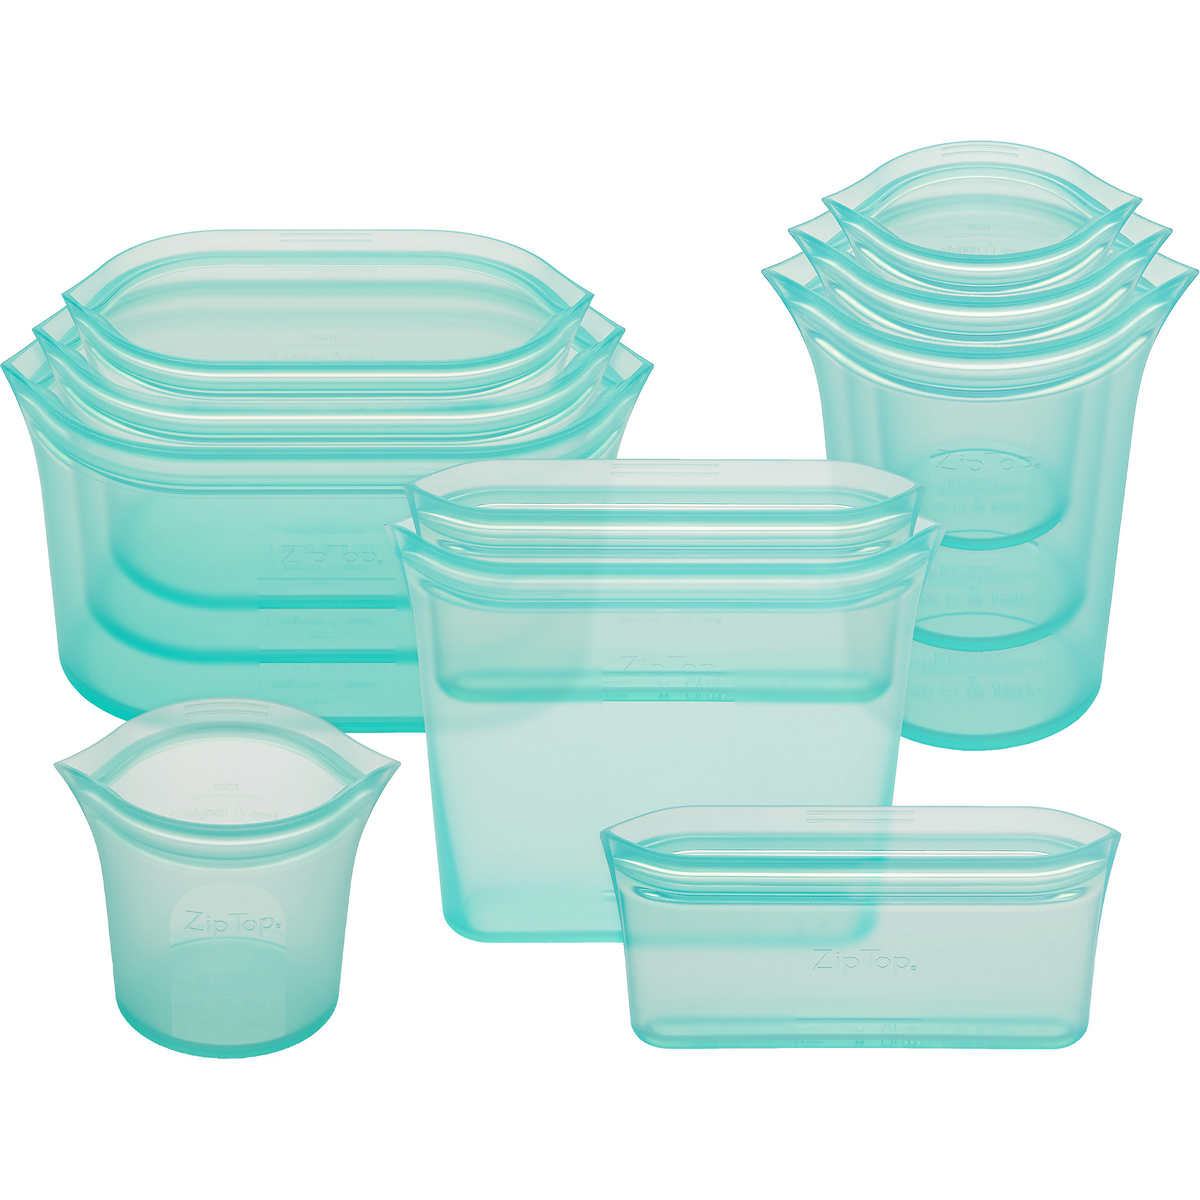 Reusable food containers and food safety